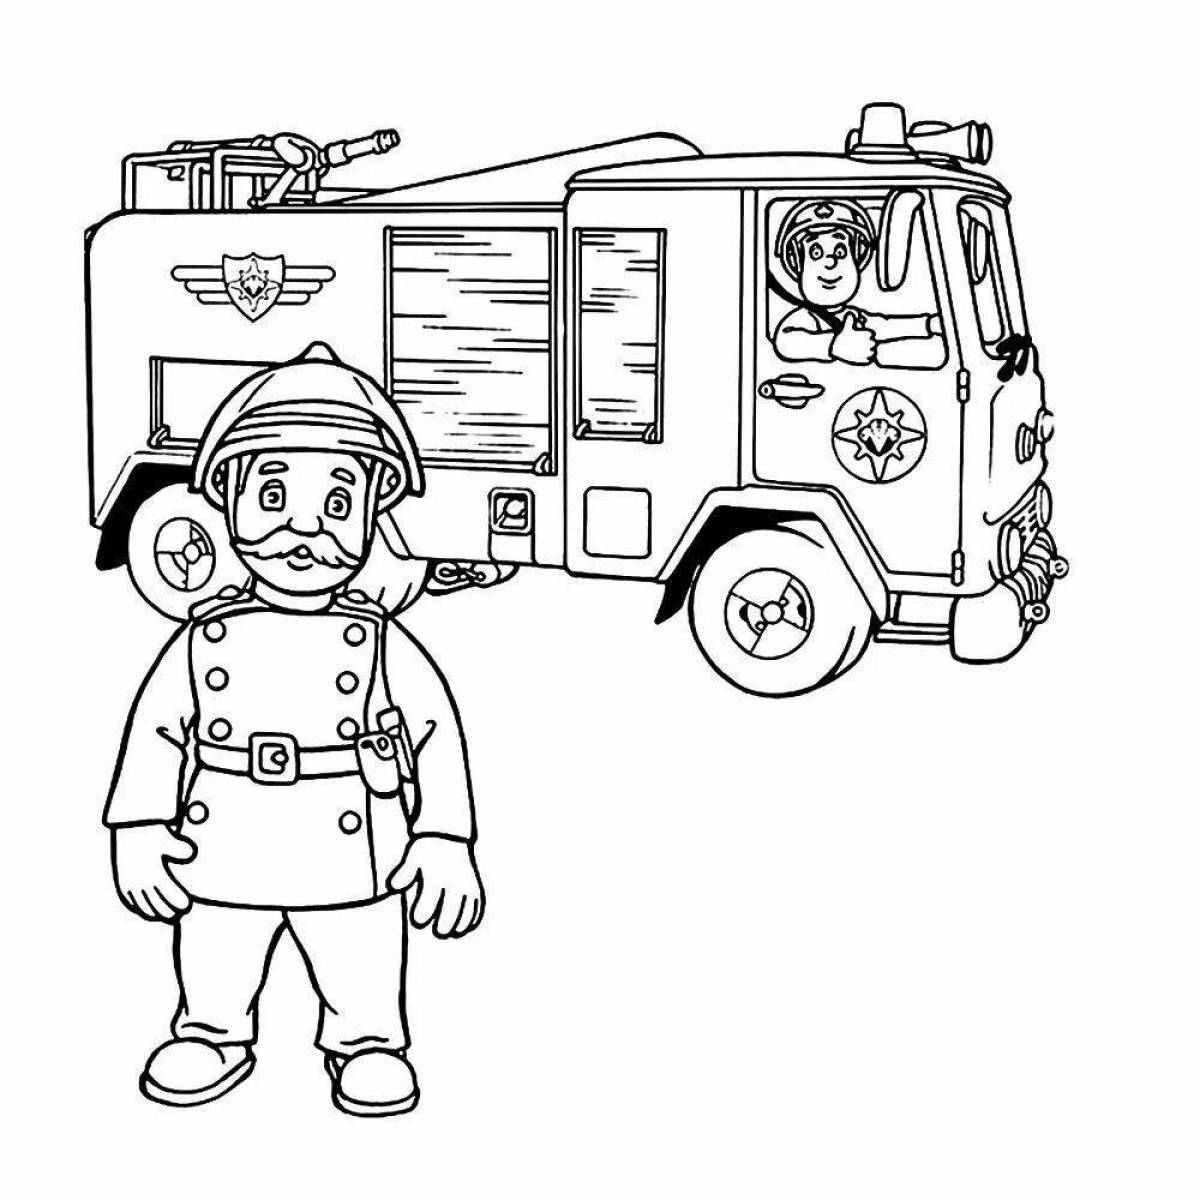 Animated coloring page who protects us